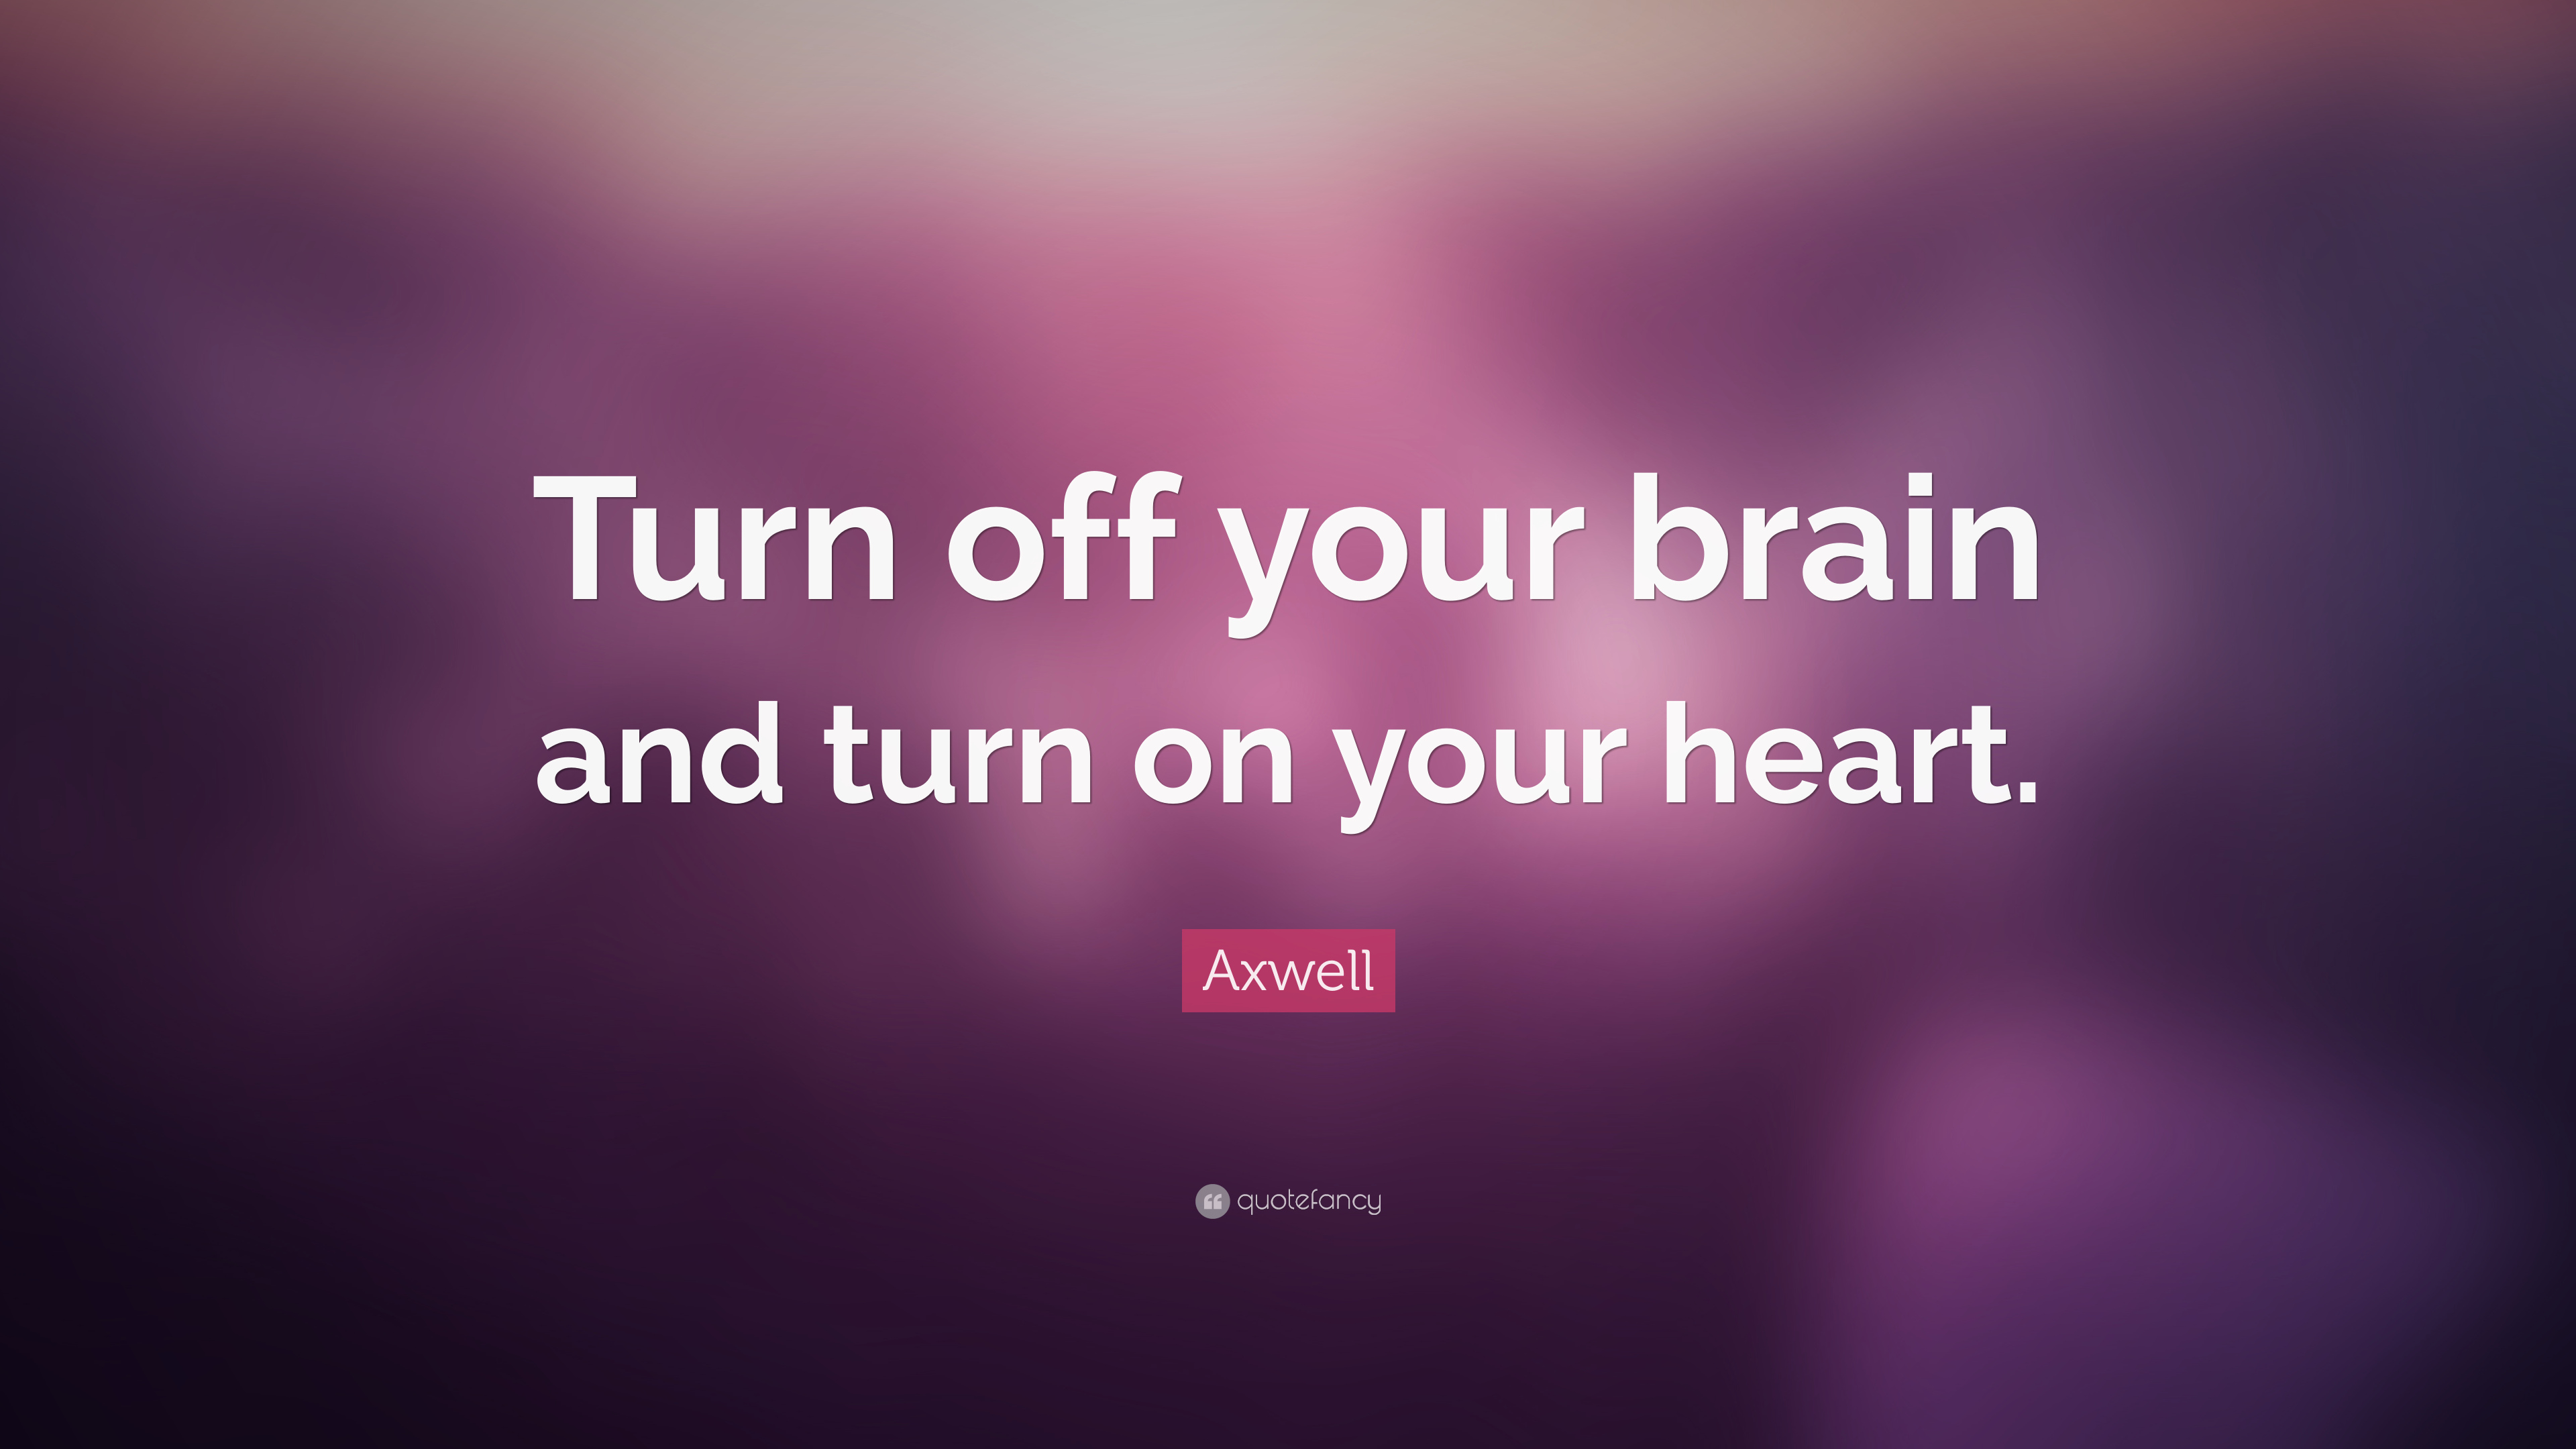 turn off your brain and turn on your heart. axwell